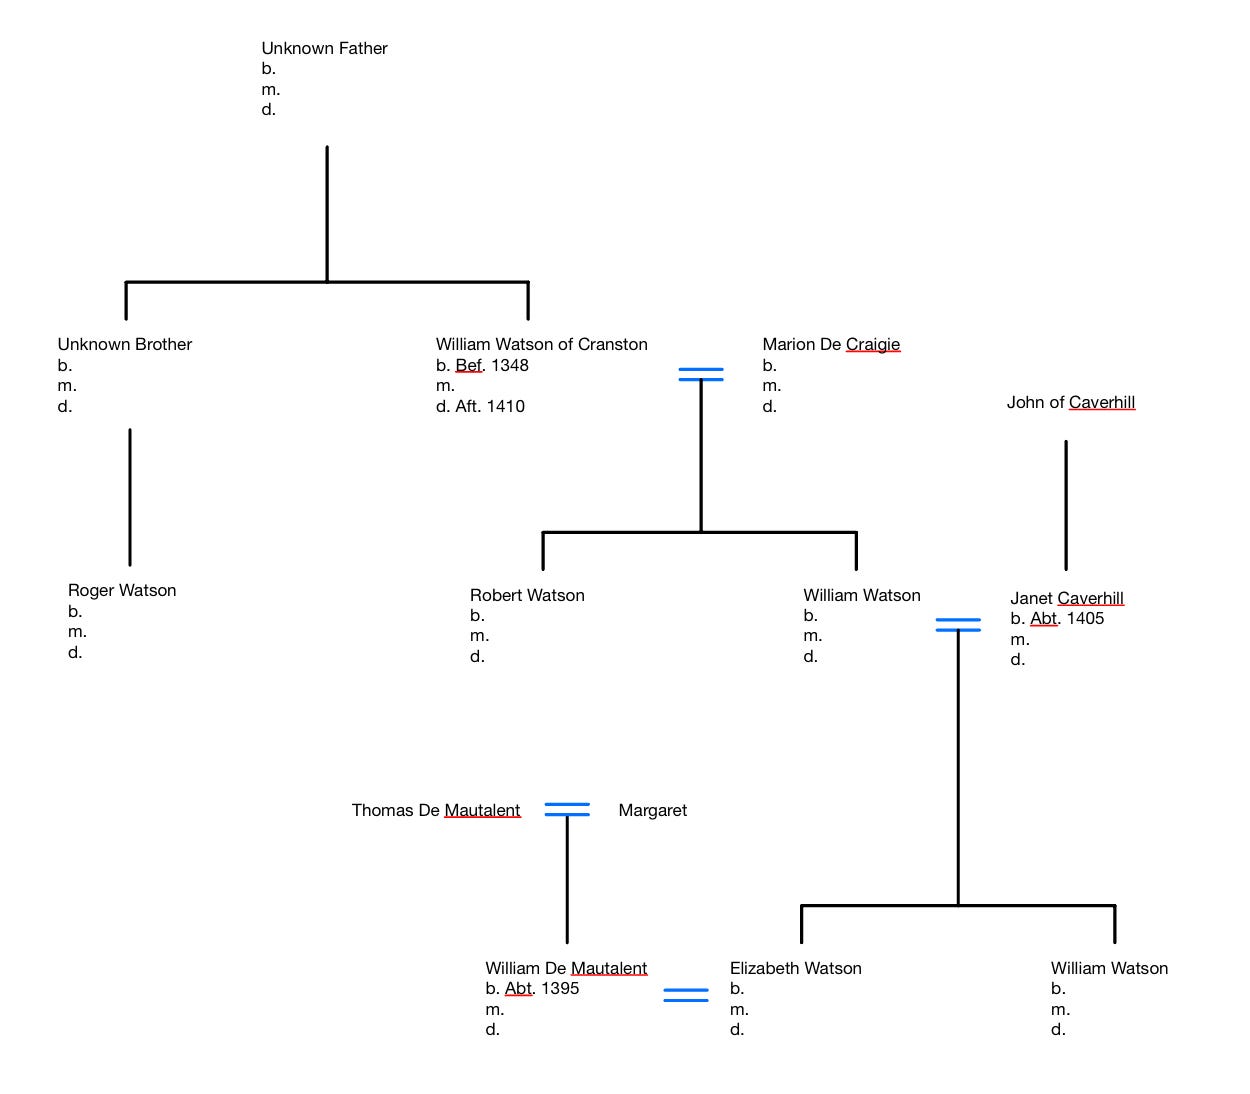 Family Tree for the Watsons of Cranston